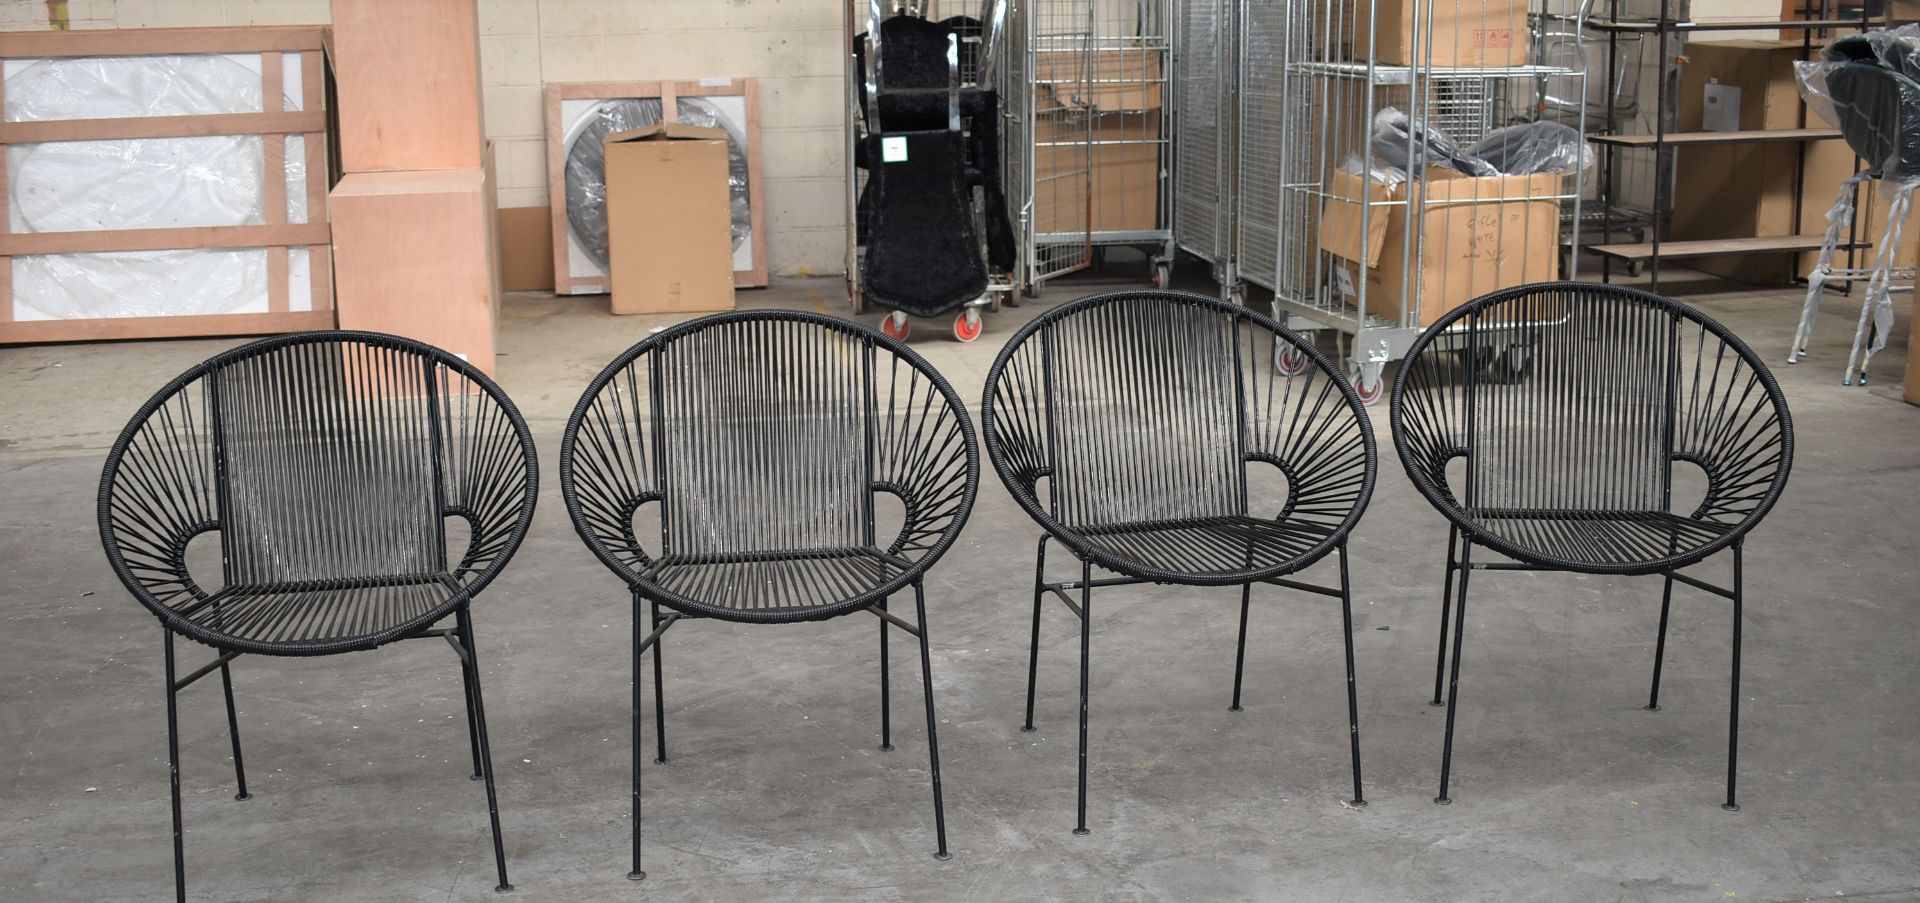 4 x Innit Designer Chairs - Acapulco Style Chairs in Black Suitable For Indoor or Outdoor Use - - Image 9 of 9